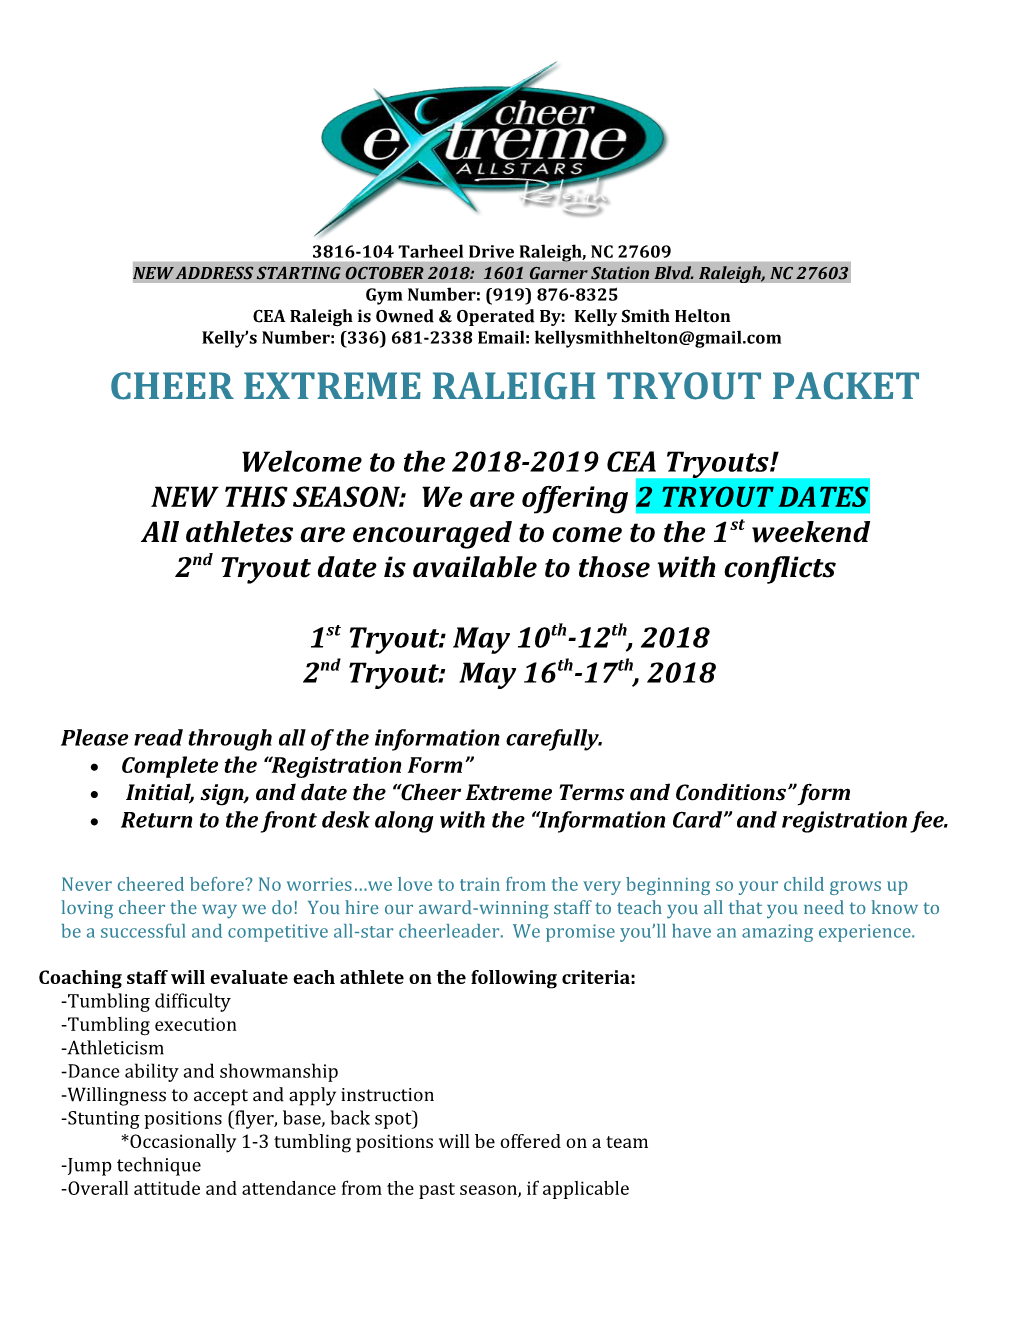 Cheer Extreme Tryout Packet